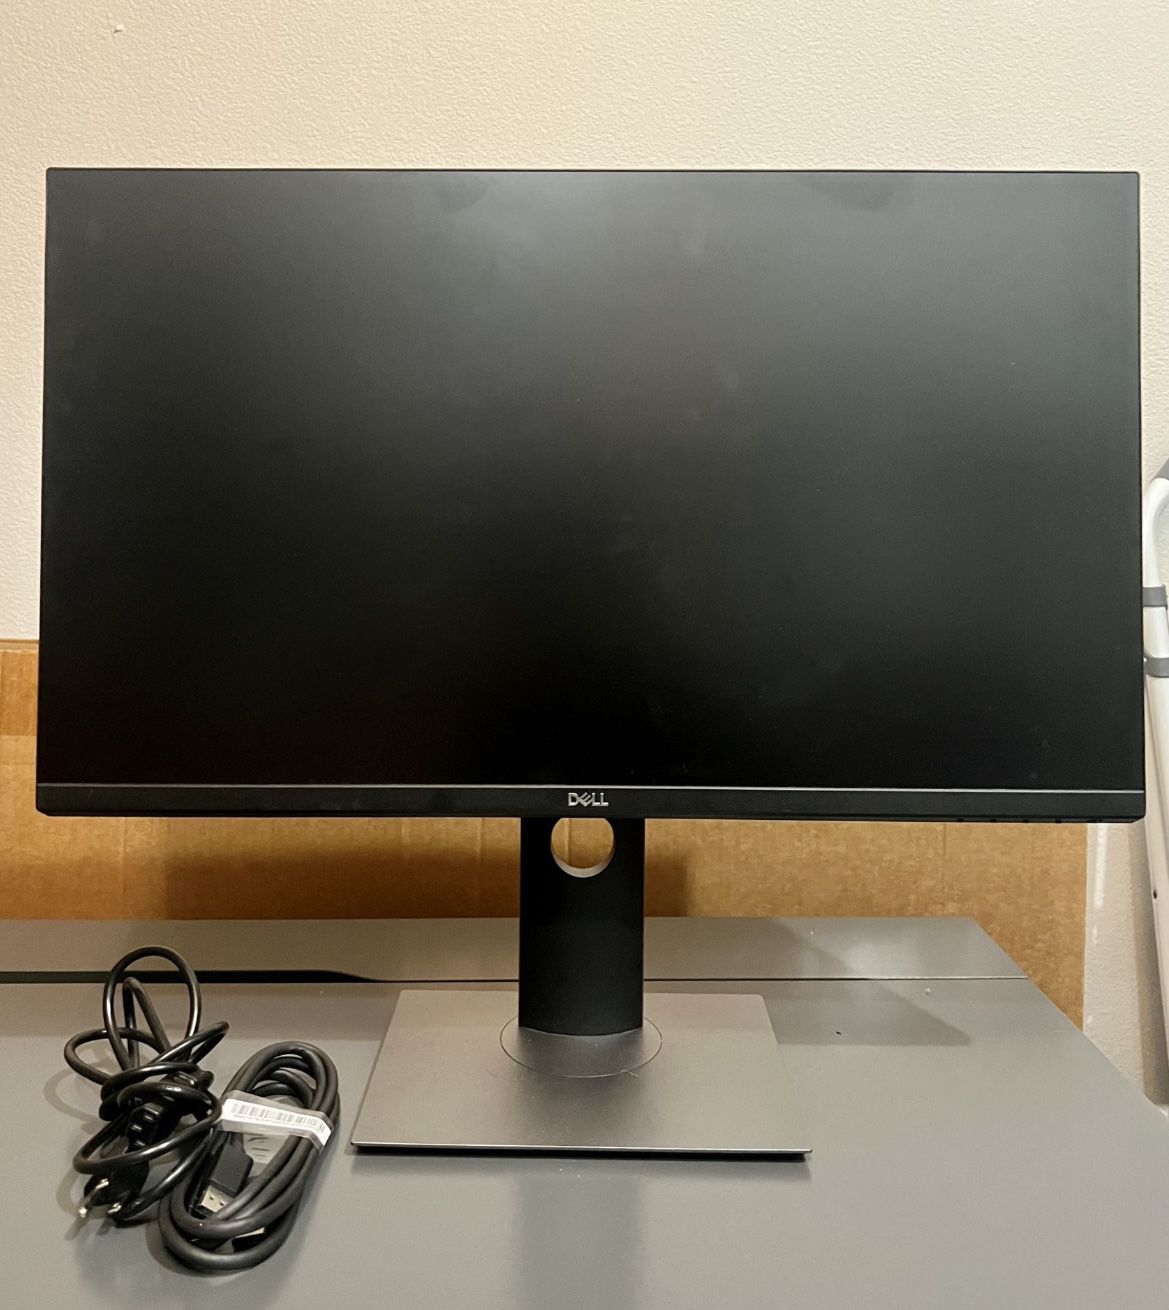 Inch Dell PDC Monitor for Sale in Irvine, CA   OfferUp